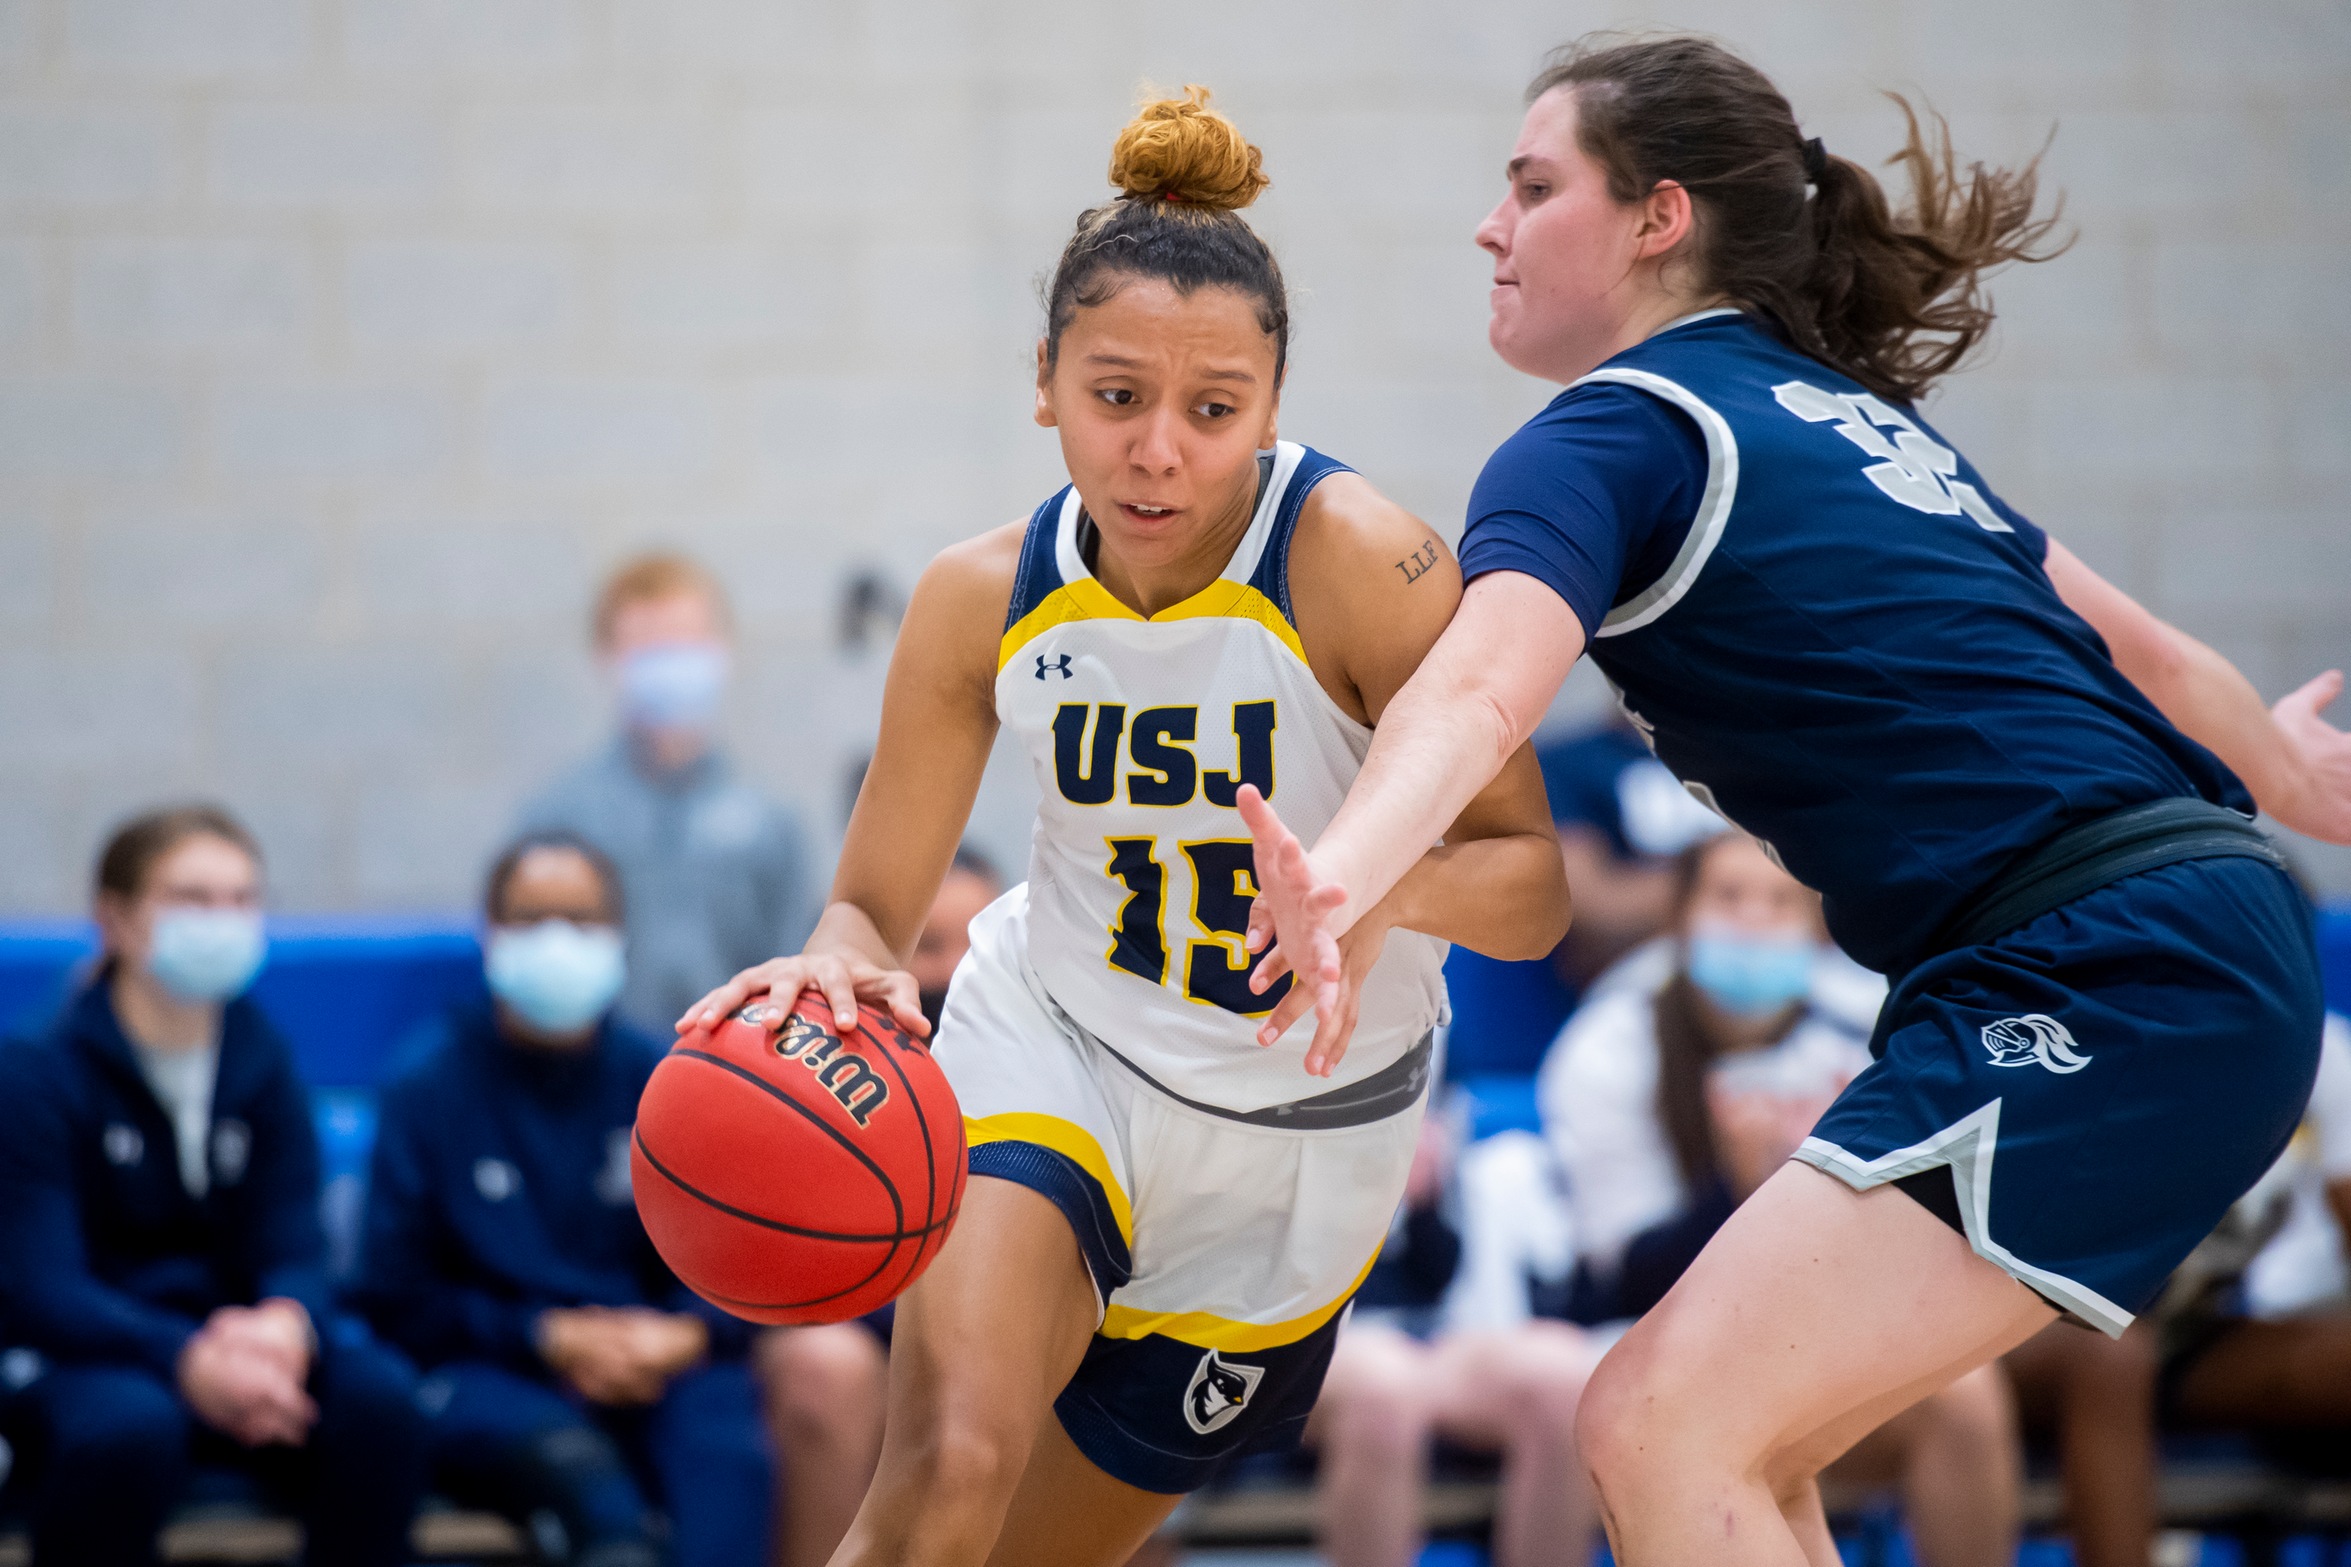 Women's Basketball Tripped Up By Falcons Monday, 73-58